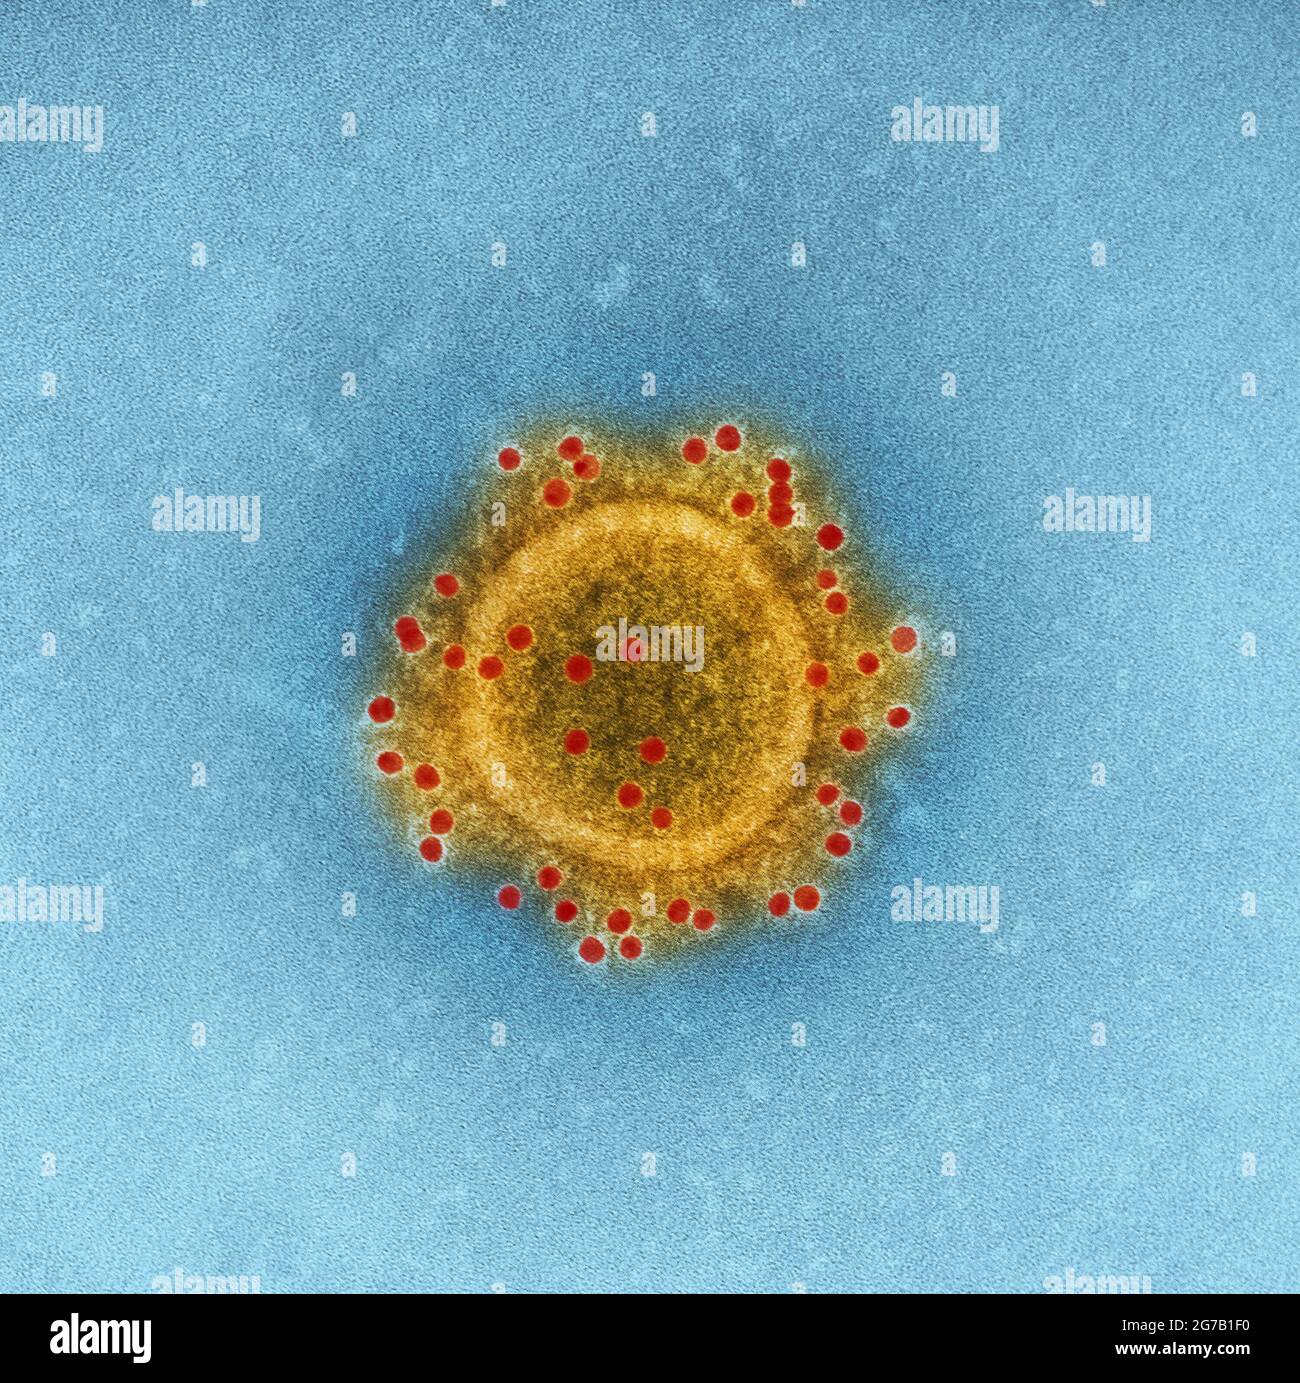 Image of 'Middle East respiratory syndrome coronavirus' (MERS-CoV) virion produced by the US National Institute of Allergy and Infectious Diseases (NIAID), this highly magnified, digitally colorised transmission electron microscopic (TEM) image highlights the particle envelope of a single, spherical shaped MERS-CoV virion  An optimised and enhanced version of an image produced by the US National Institute of Allergy and Infectious Diseases / Credit: NIAID Stock Photo